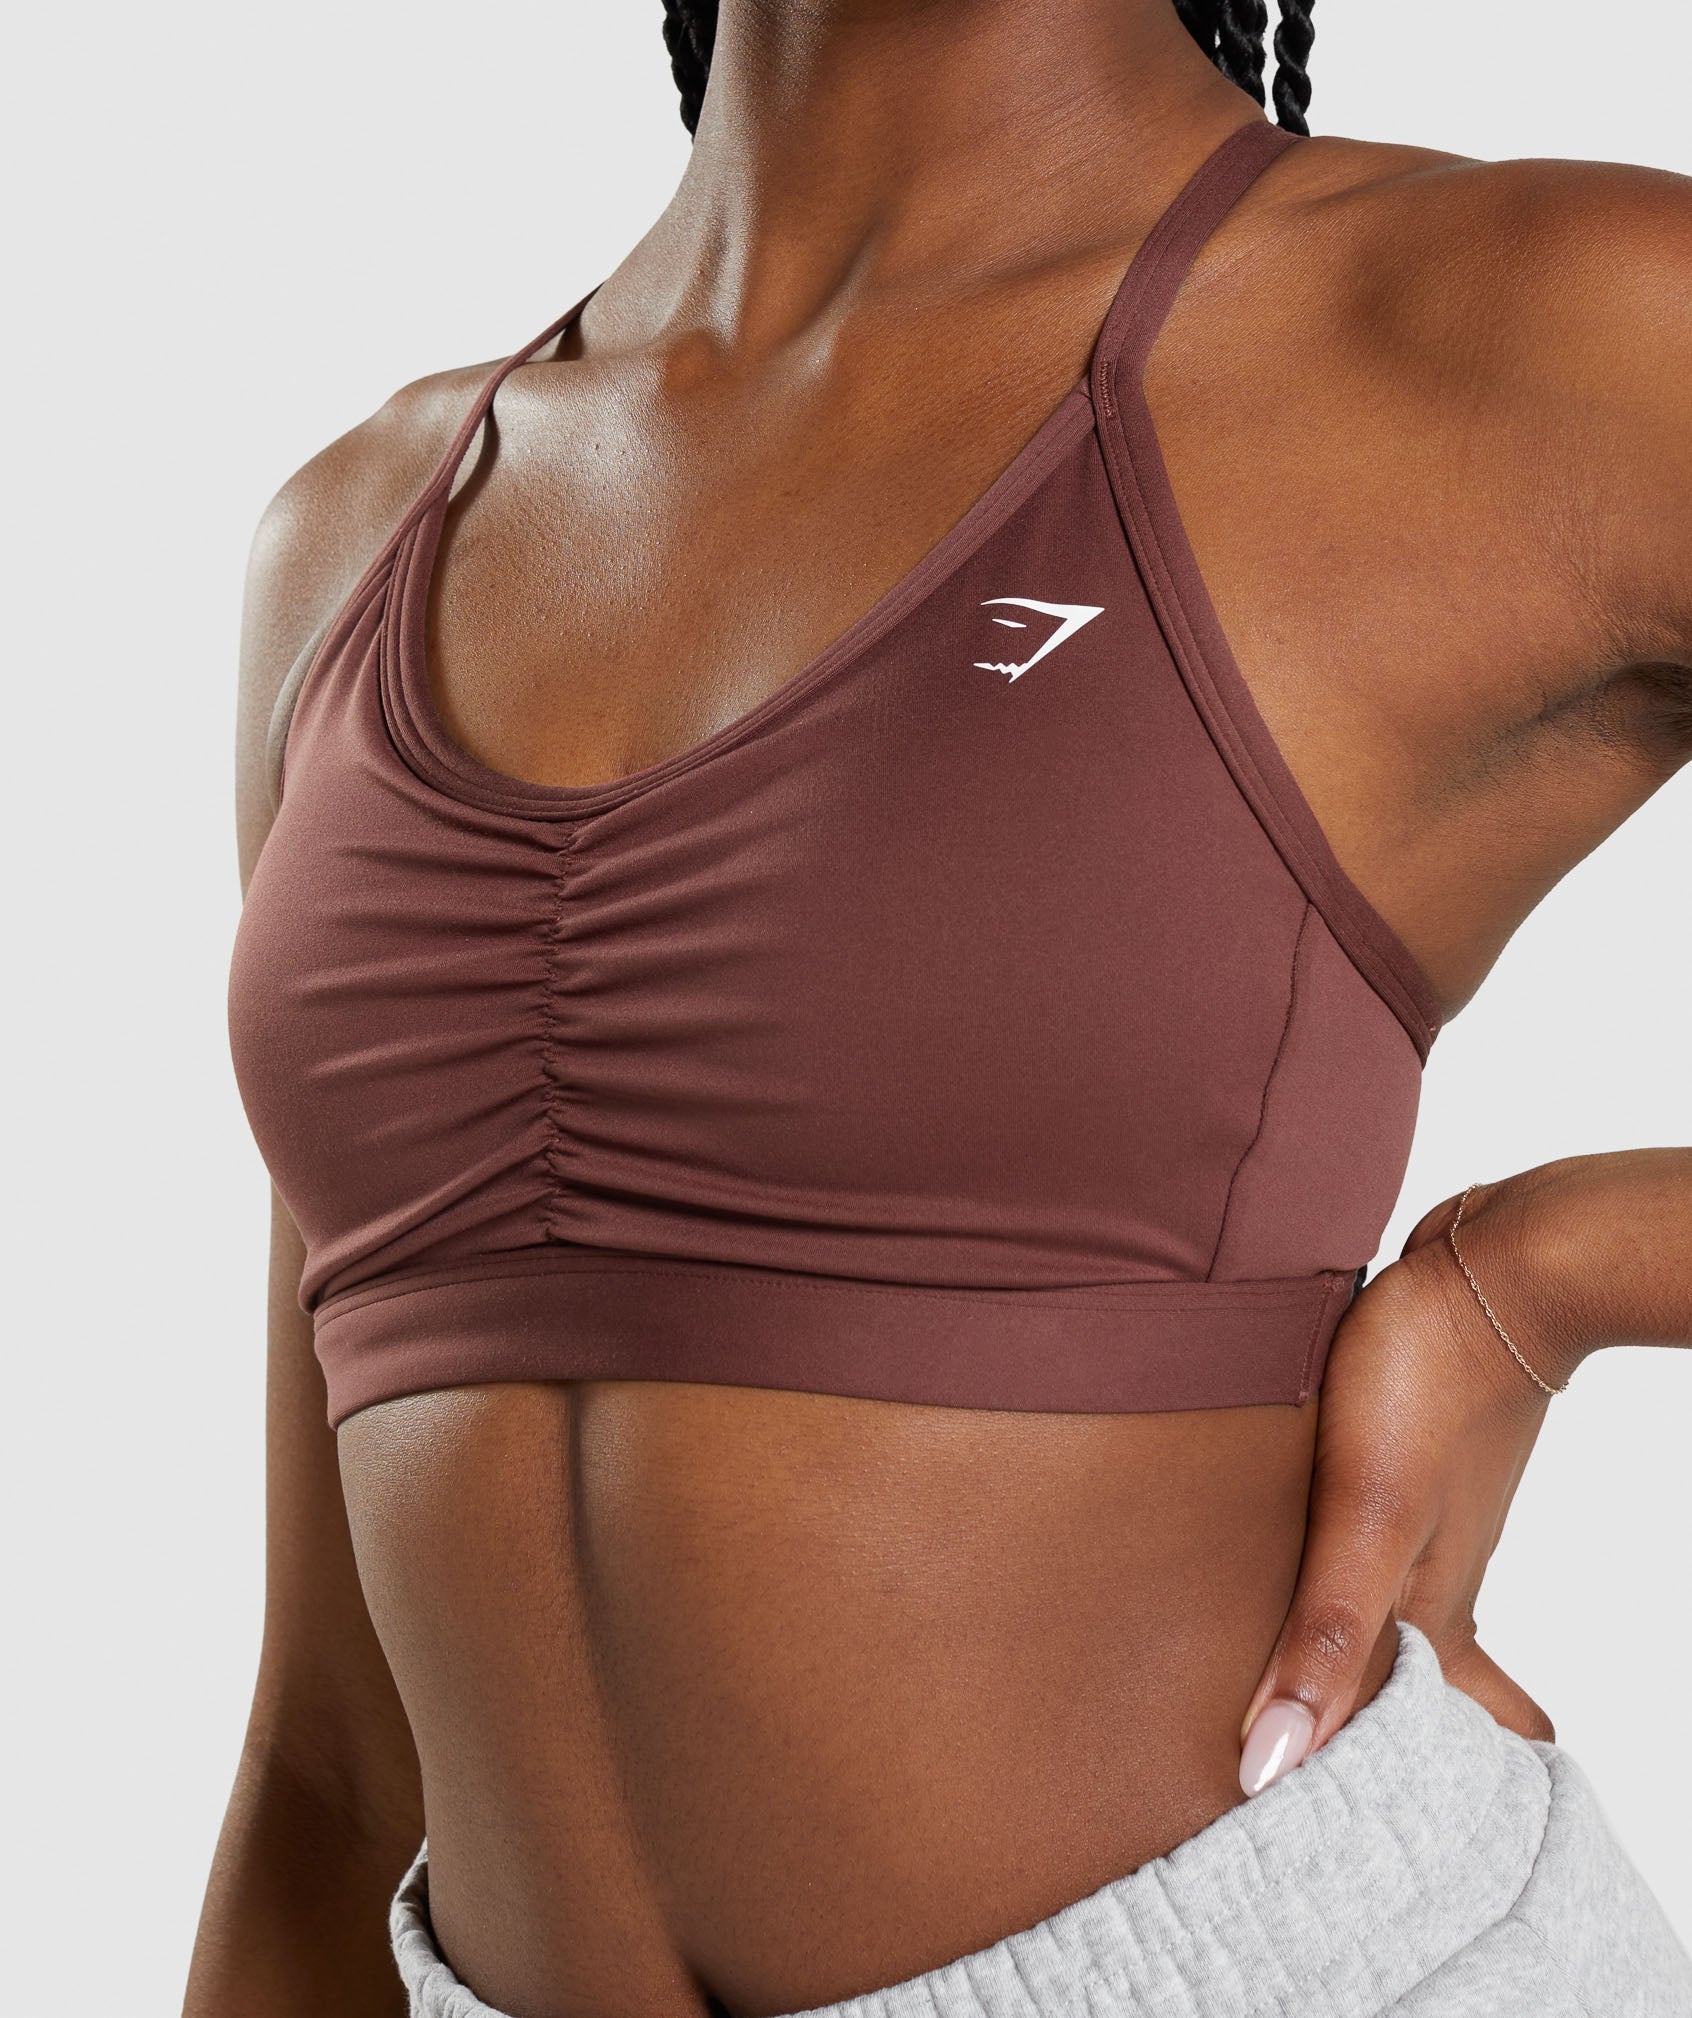 Ruched Sports Bra in Cherry Brown - view 6